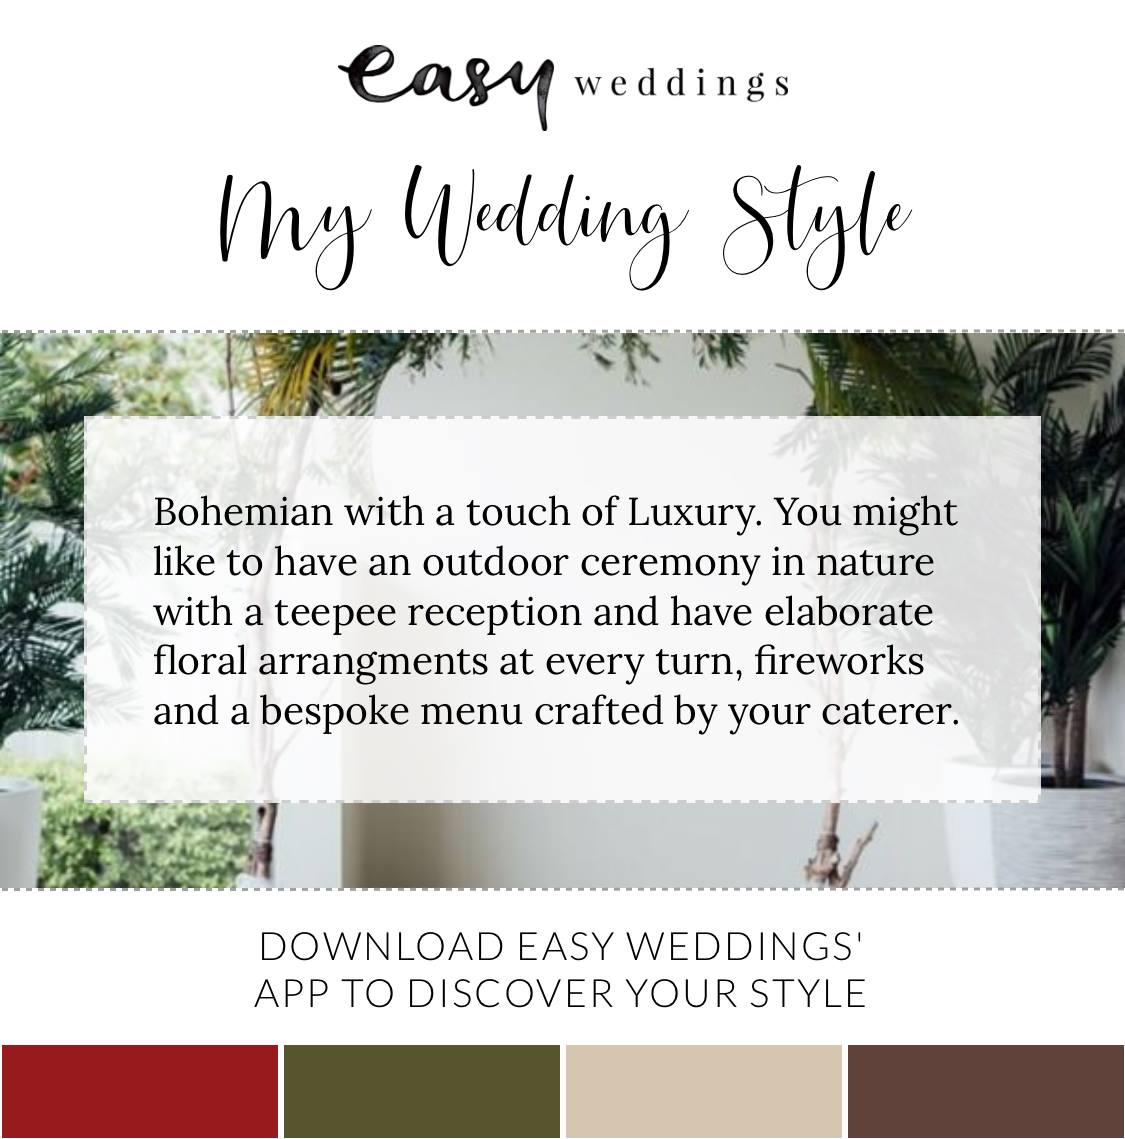 How to find a wedding venue that fits your style